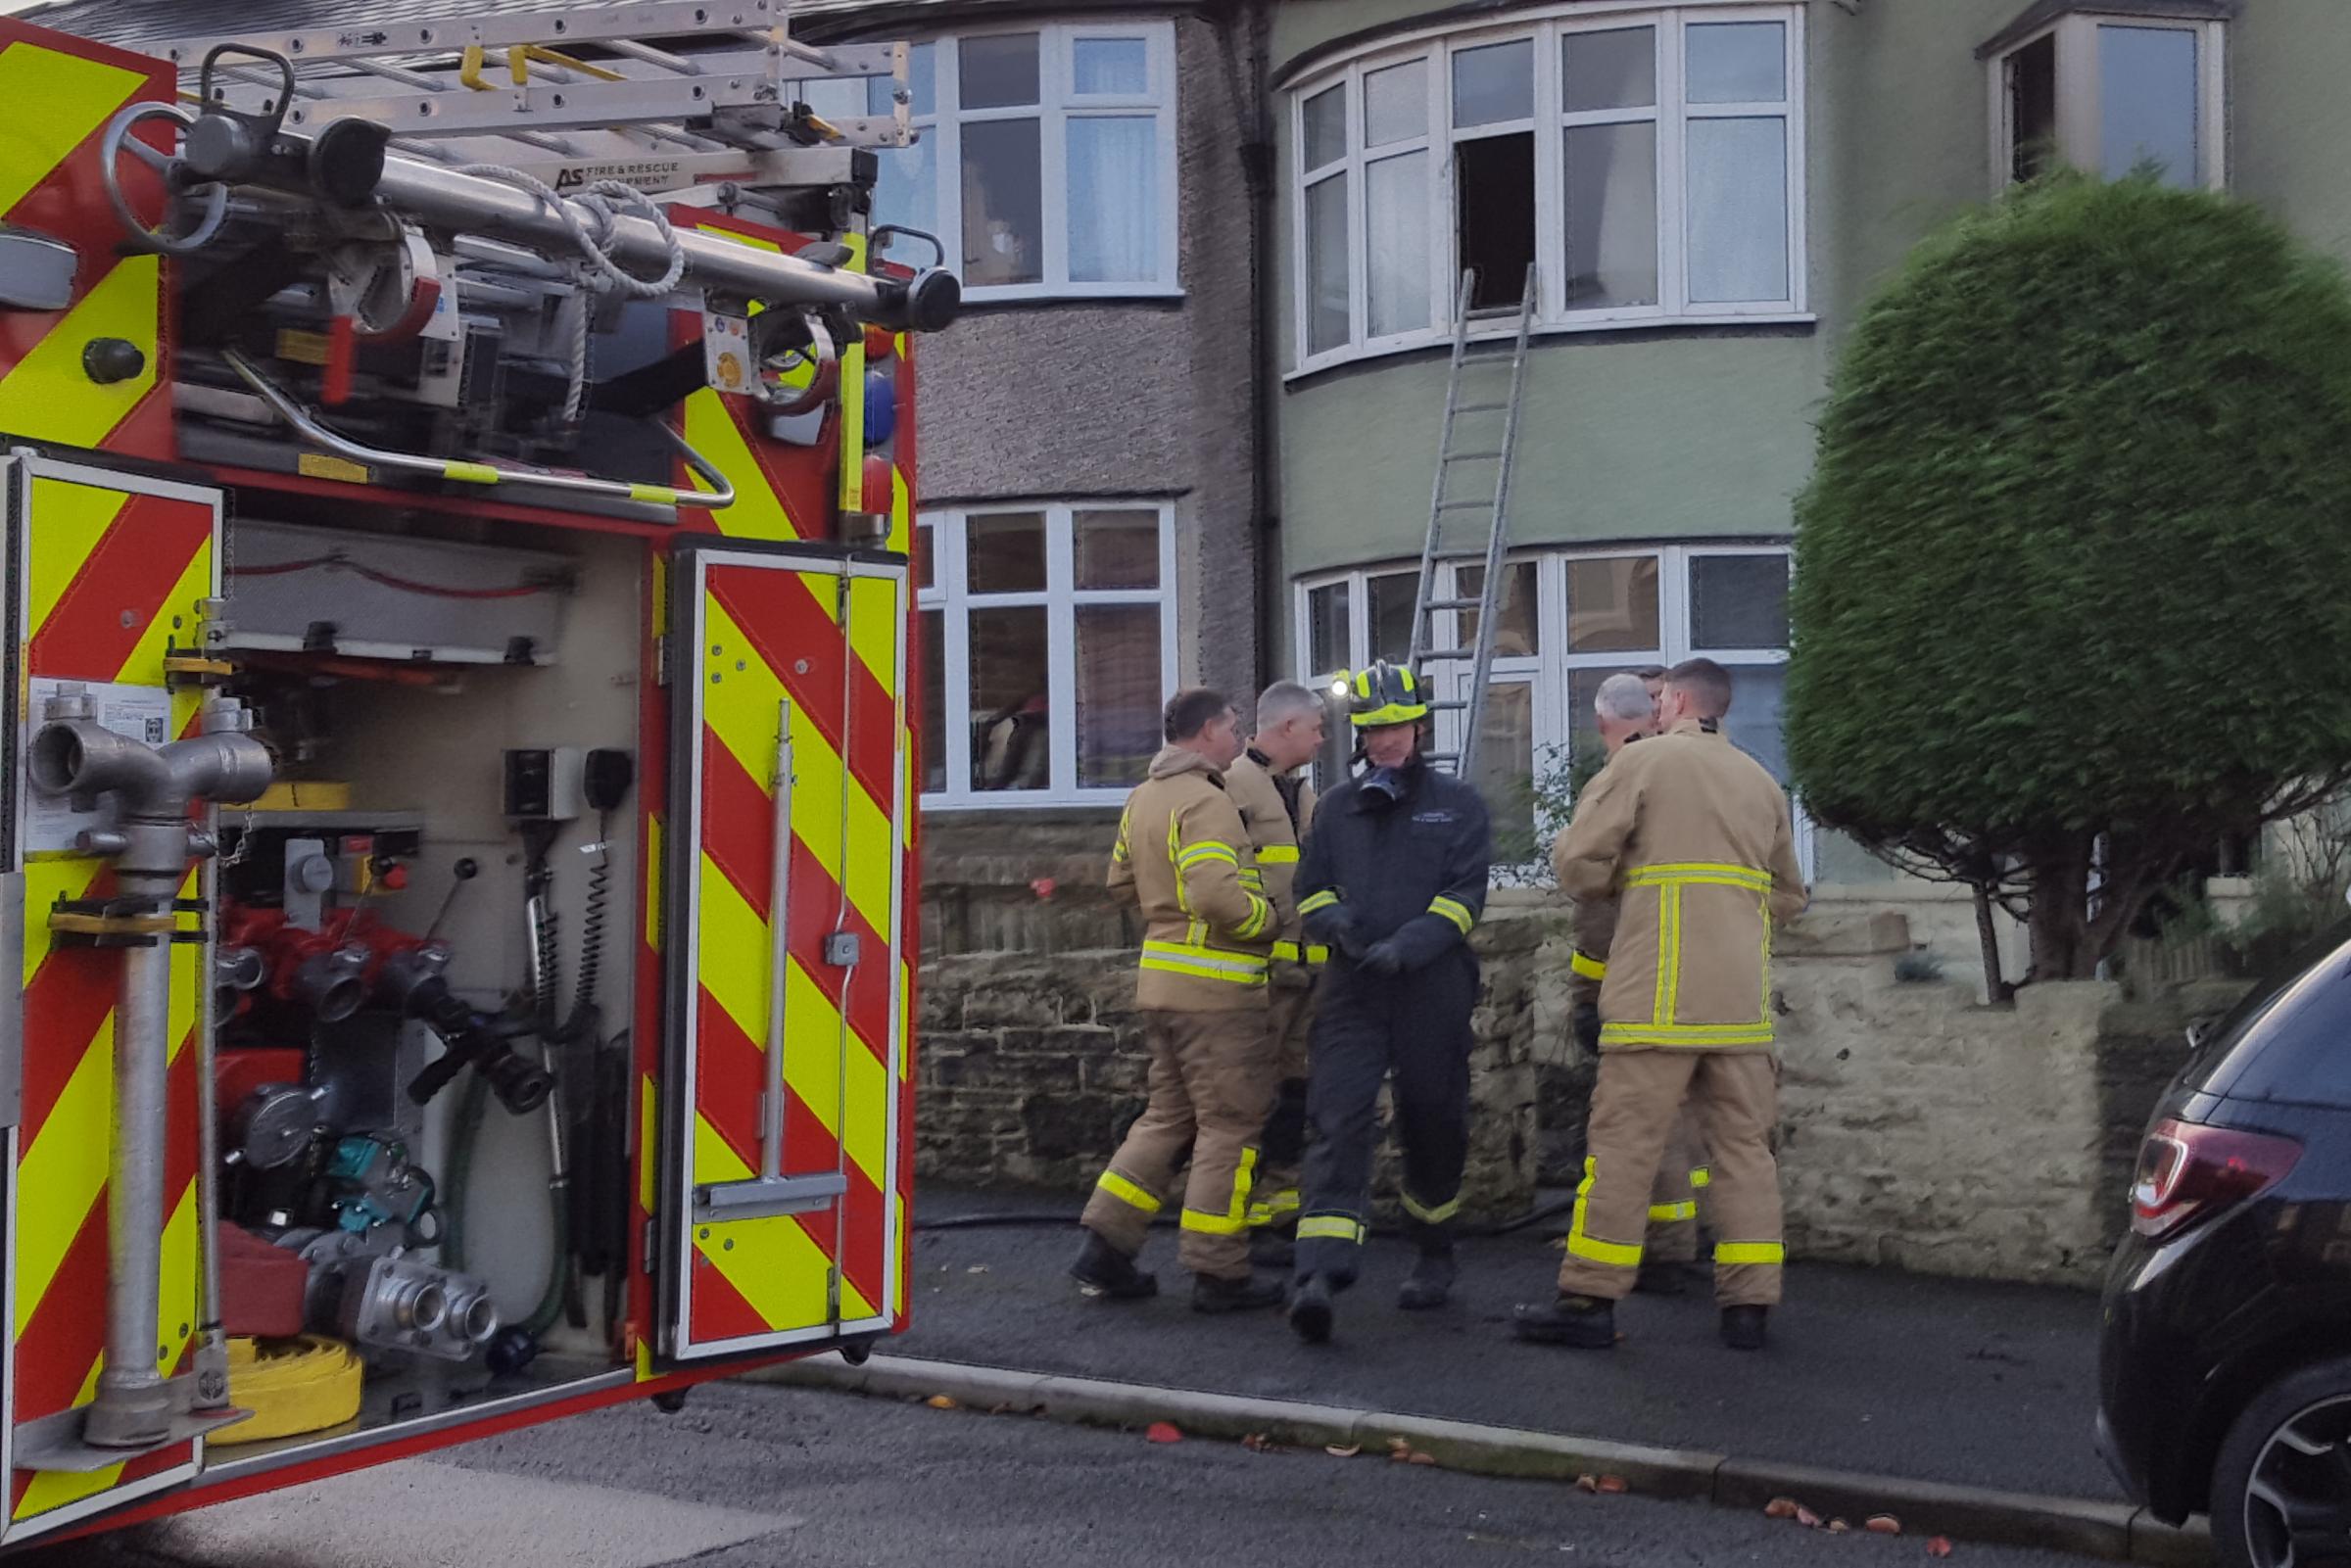 Couple in 70s rescued from house fire in Accrington